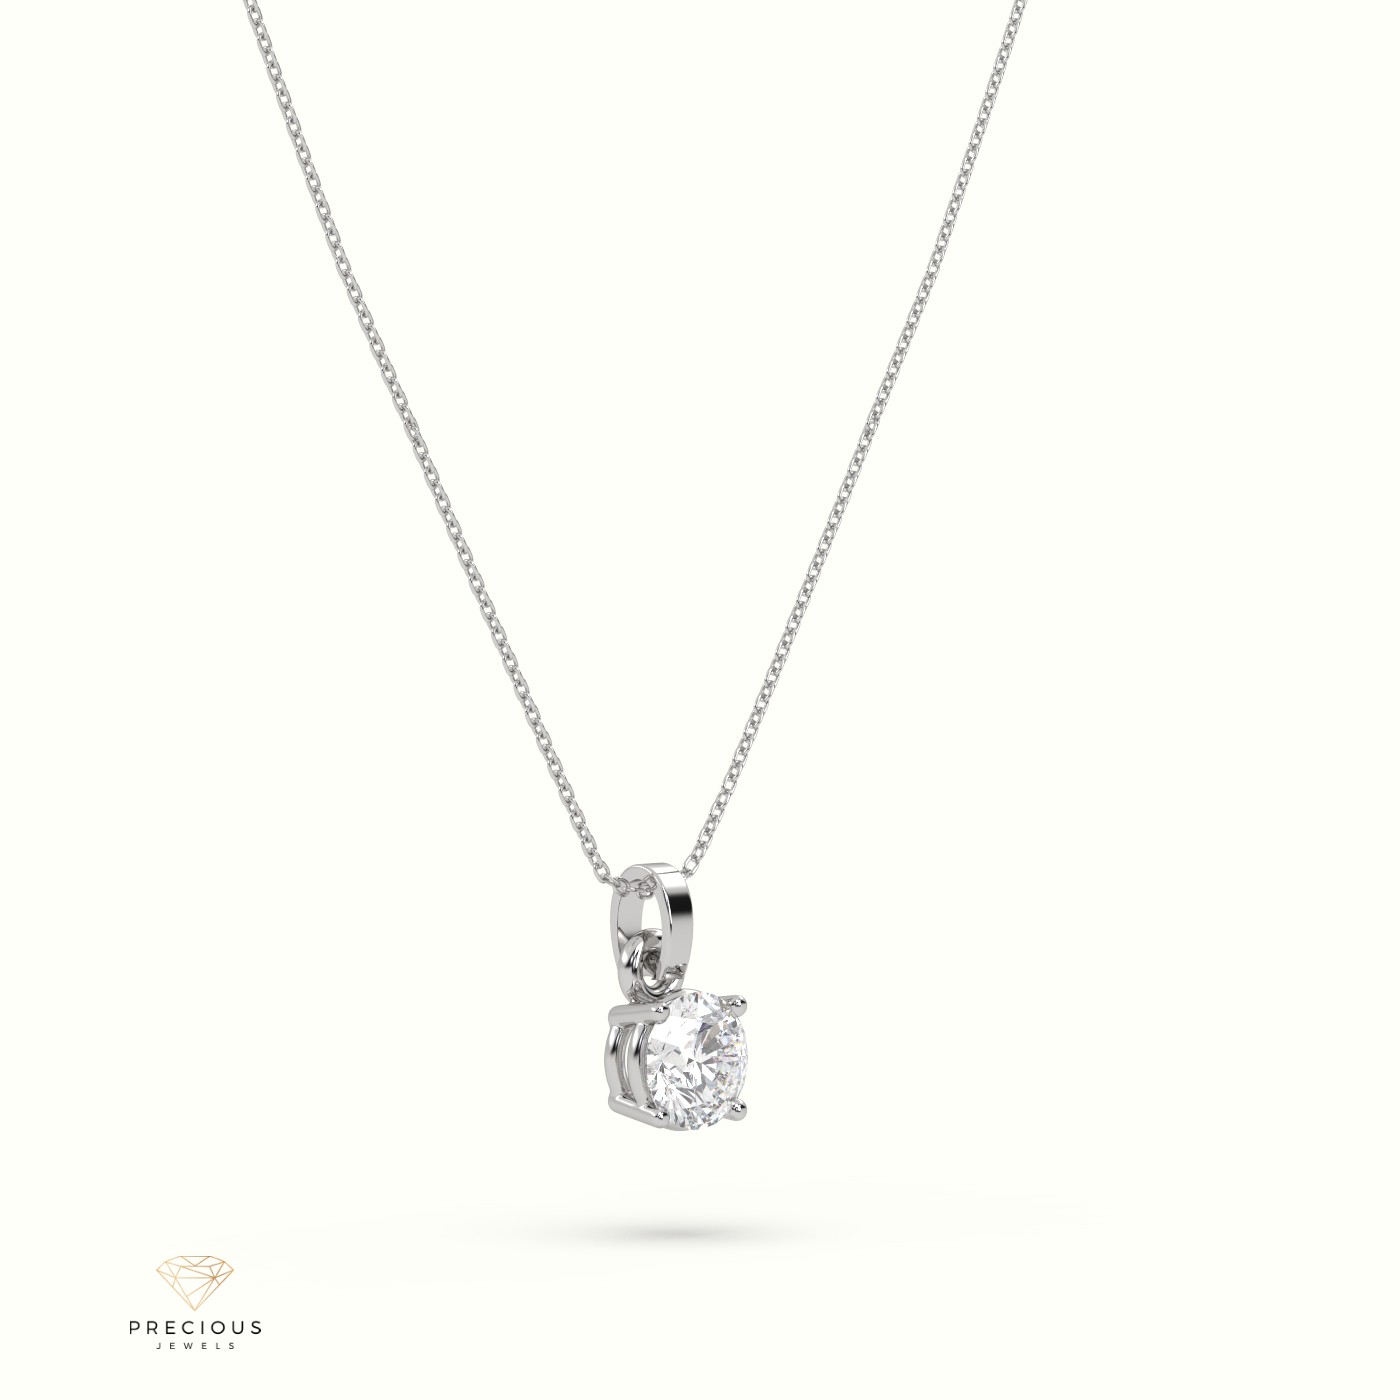 18k white gold certified diamond solitair pendant 0.30 ct to 1.50 ct si1 quality g color round 4 prongs Photos & images